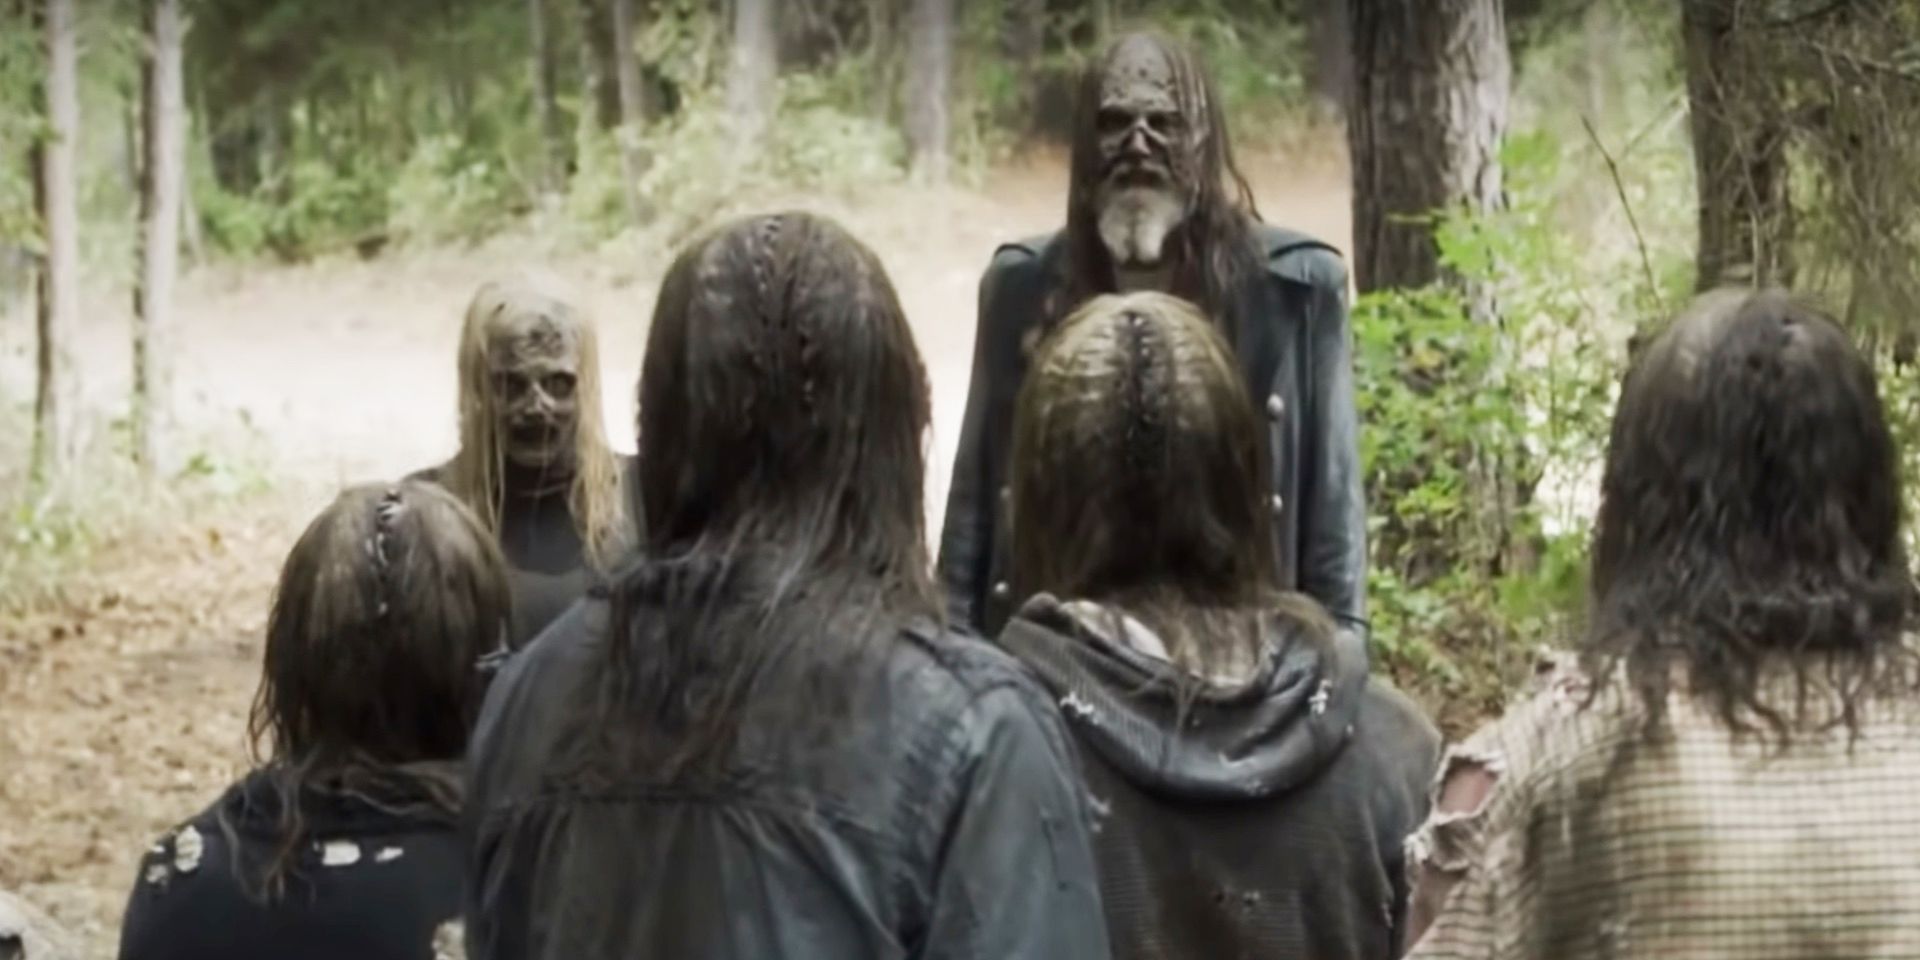 The Whisperers in The Walking Dead